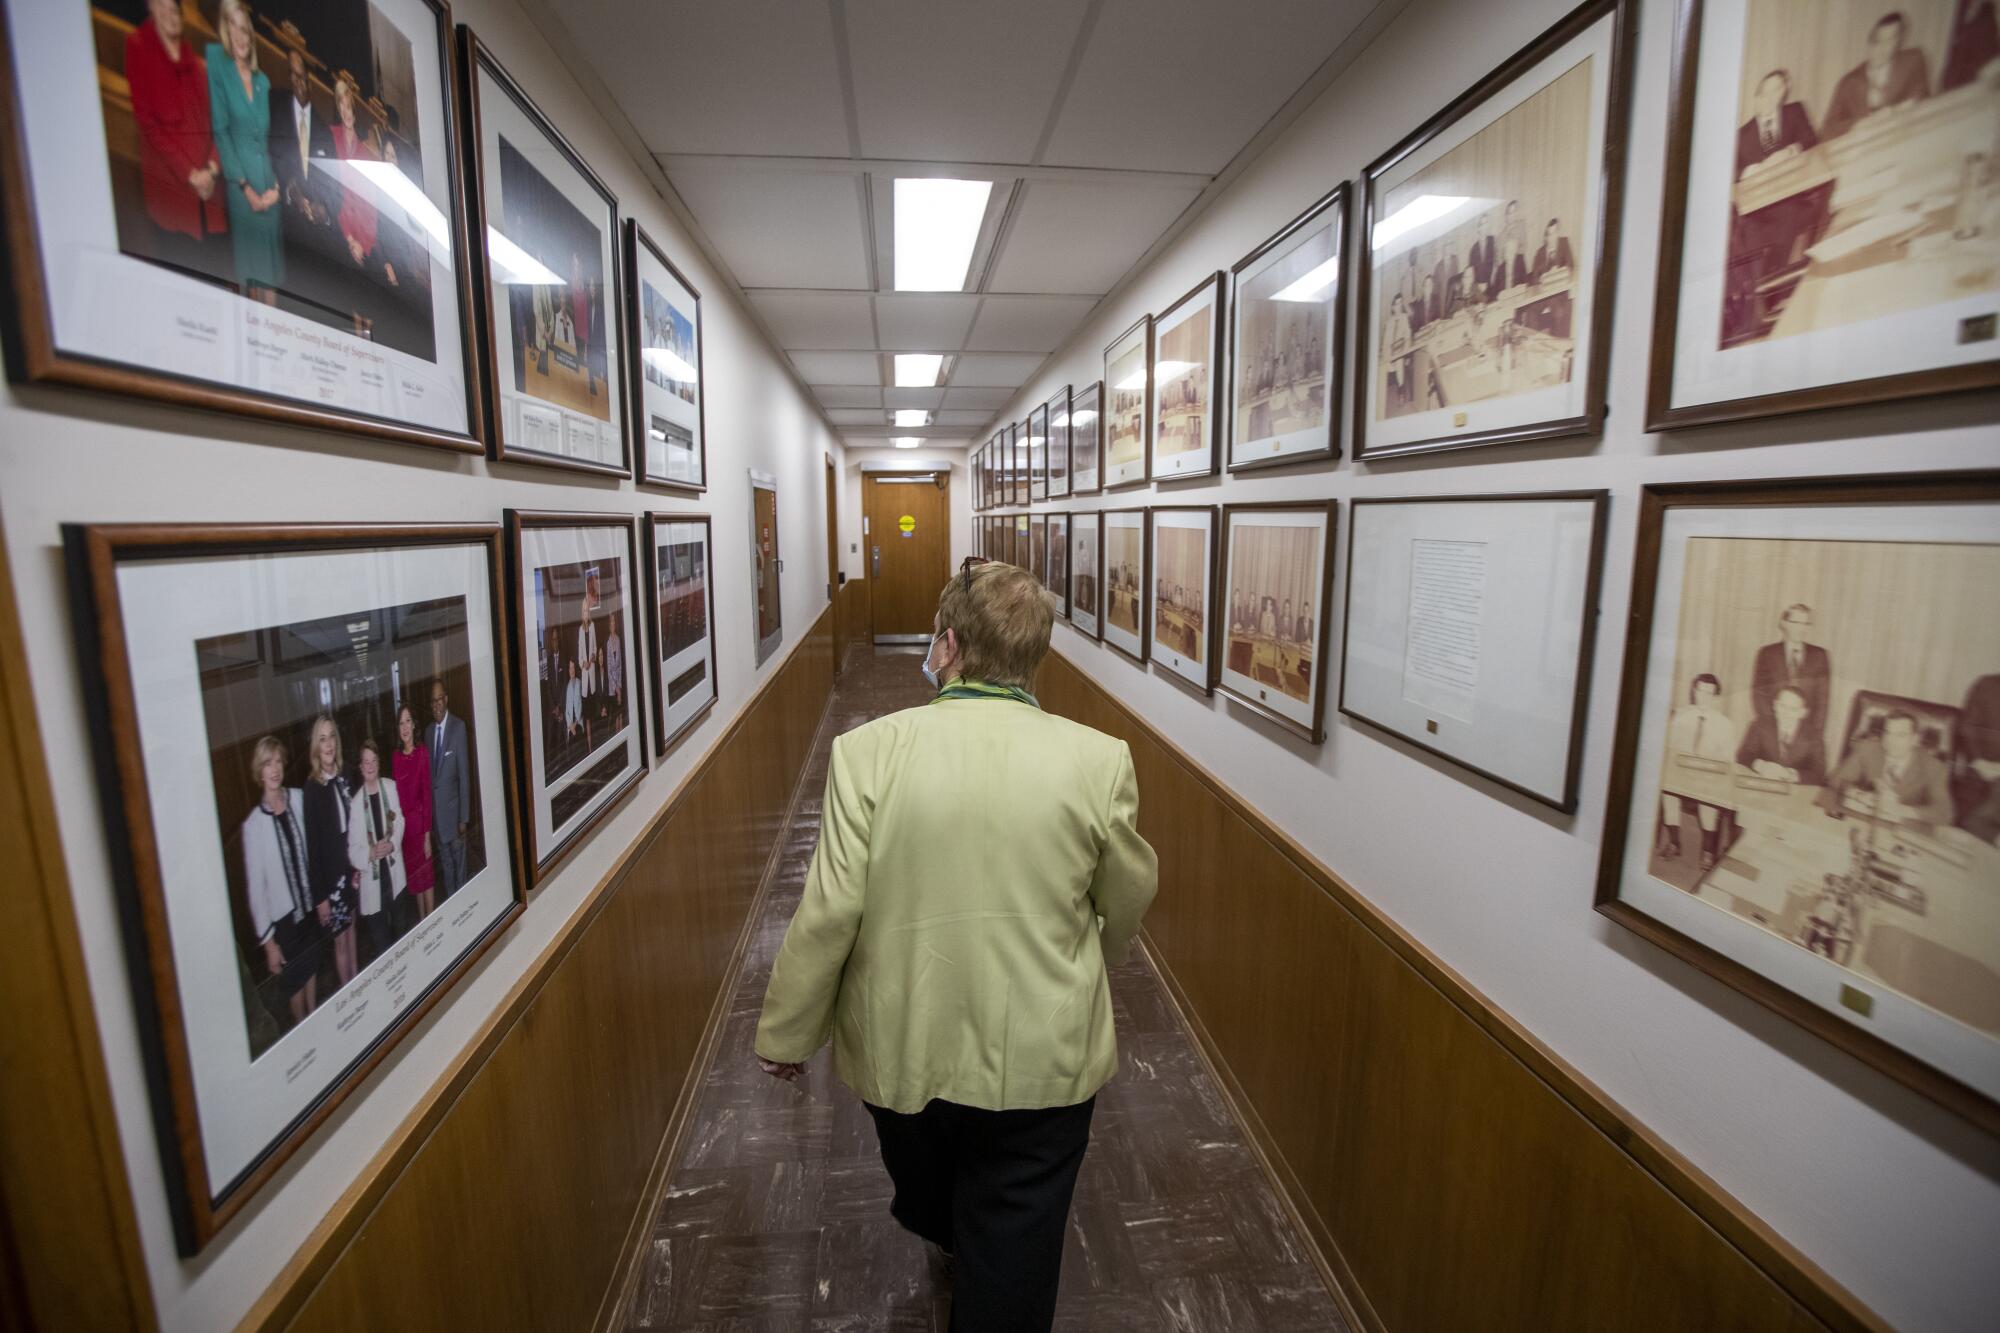 Kuehl walks down a long hallway lined with framed photos.